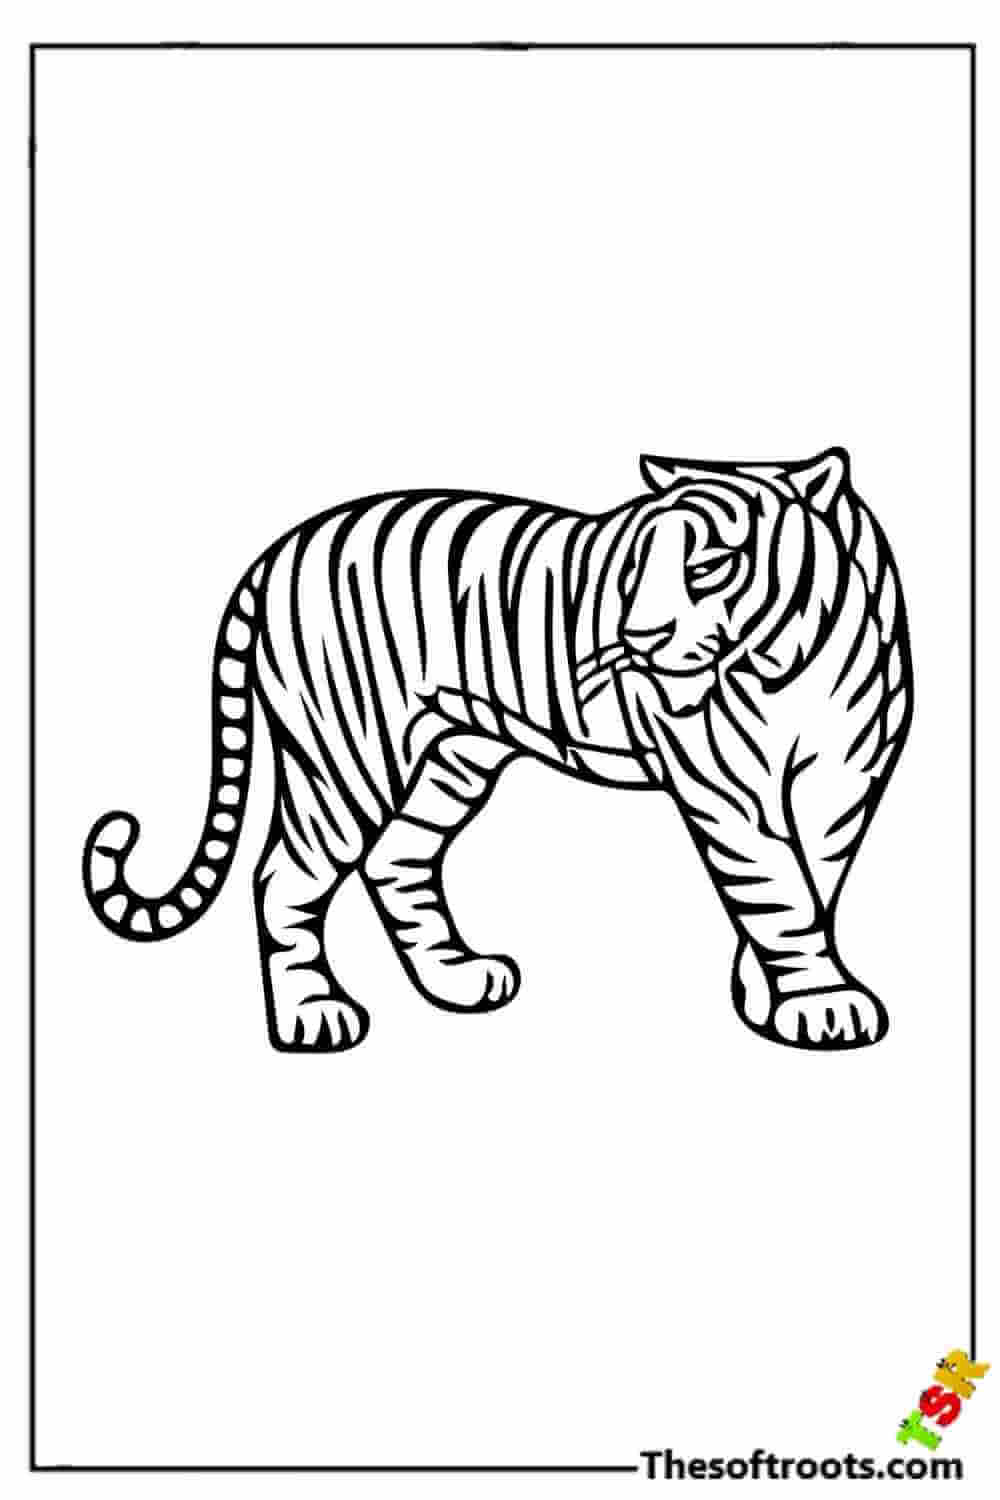 Realistic Tiger coloring pages